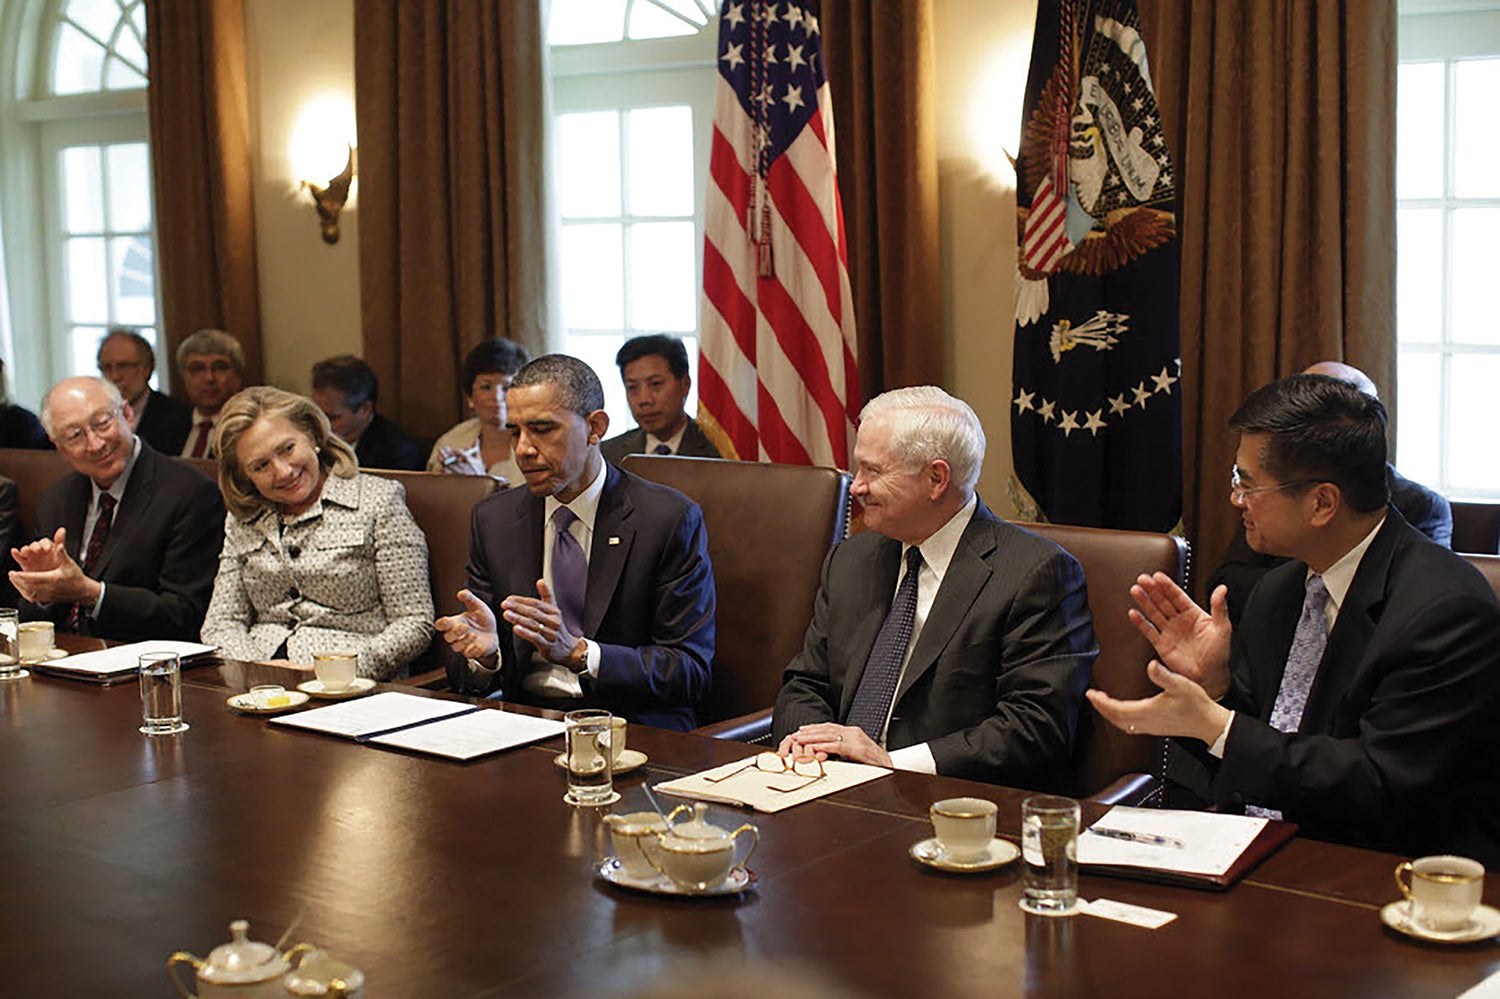 During a Cabinet meeting in May 2011, then-President Barack Obama, second from left, applauds Defense Secretary Robert Gates, third from left, after the successful U.S. raid against al-Qaida leader Osama bin Laden in Pakistan. (Credit: National Archives)